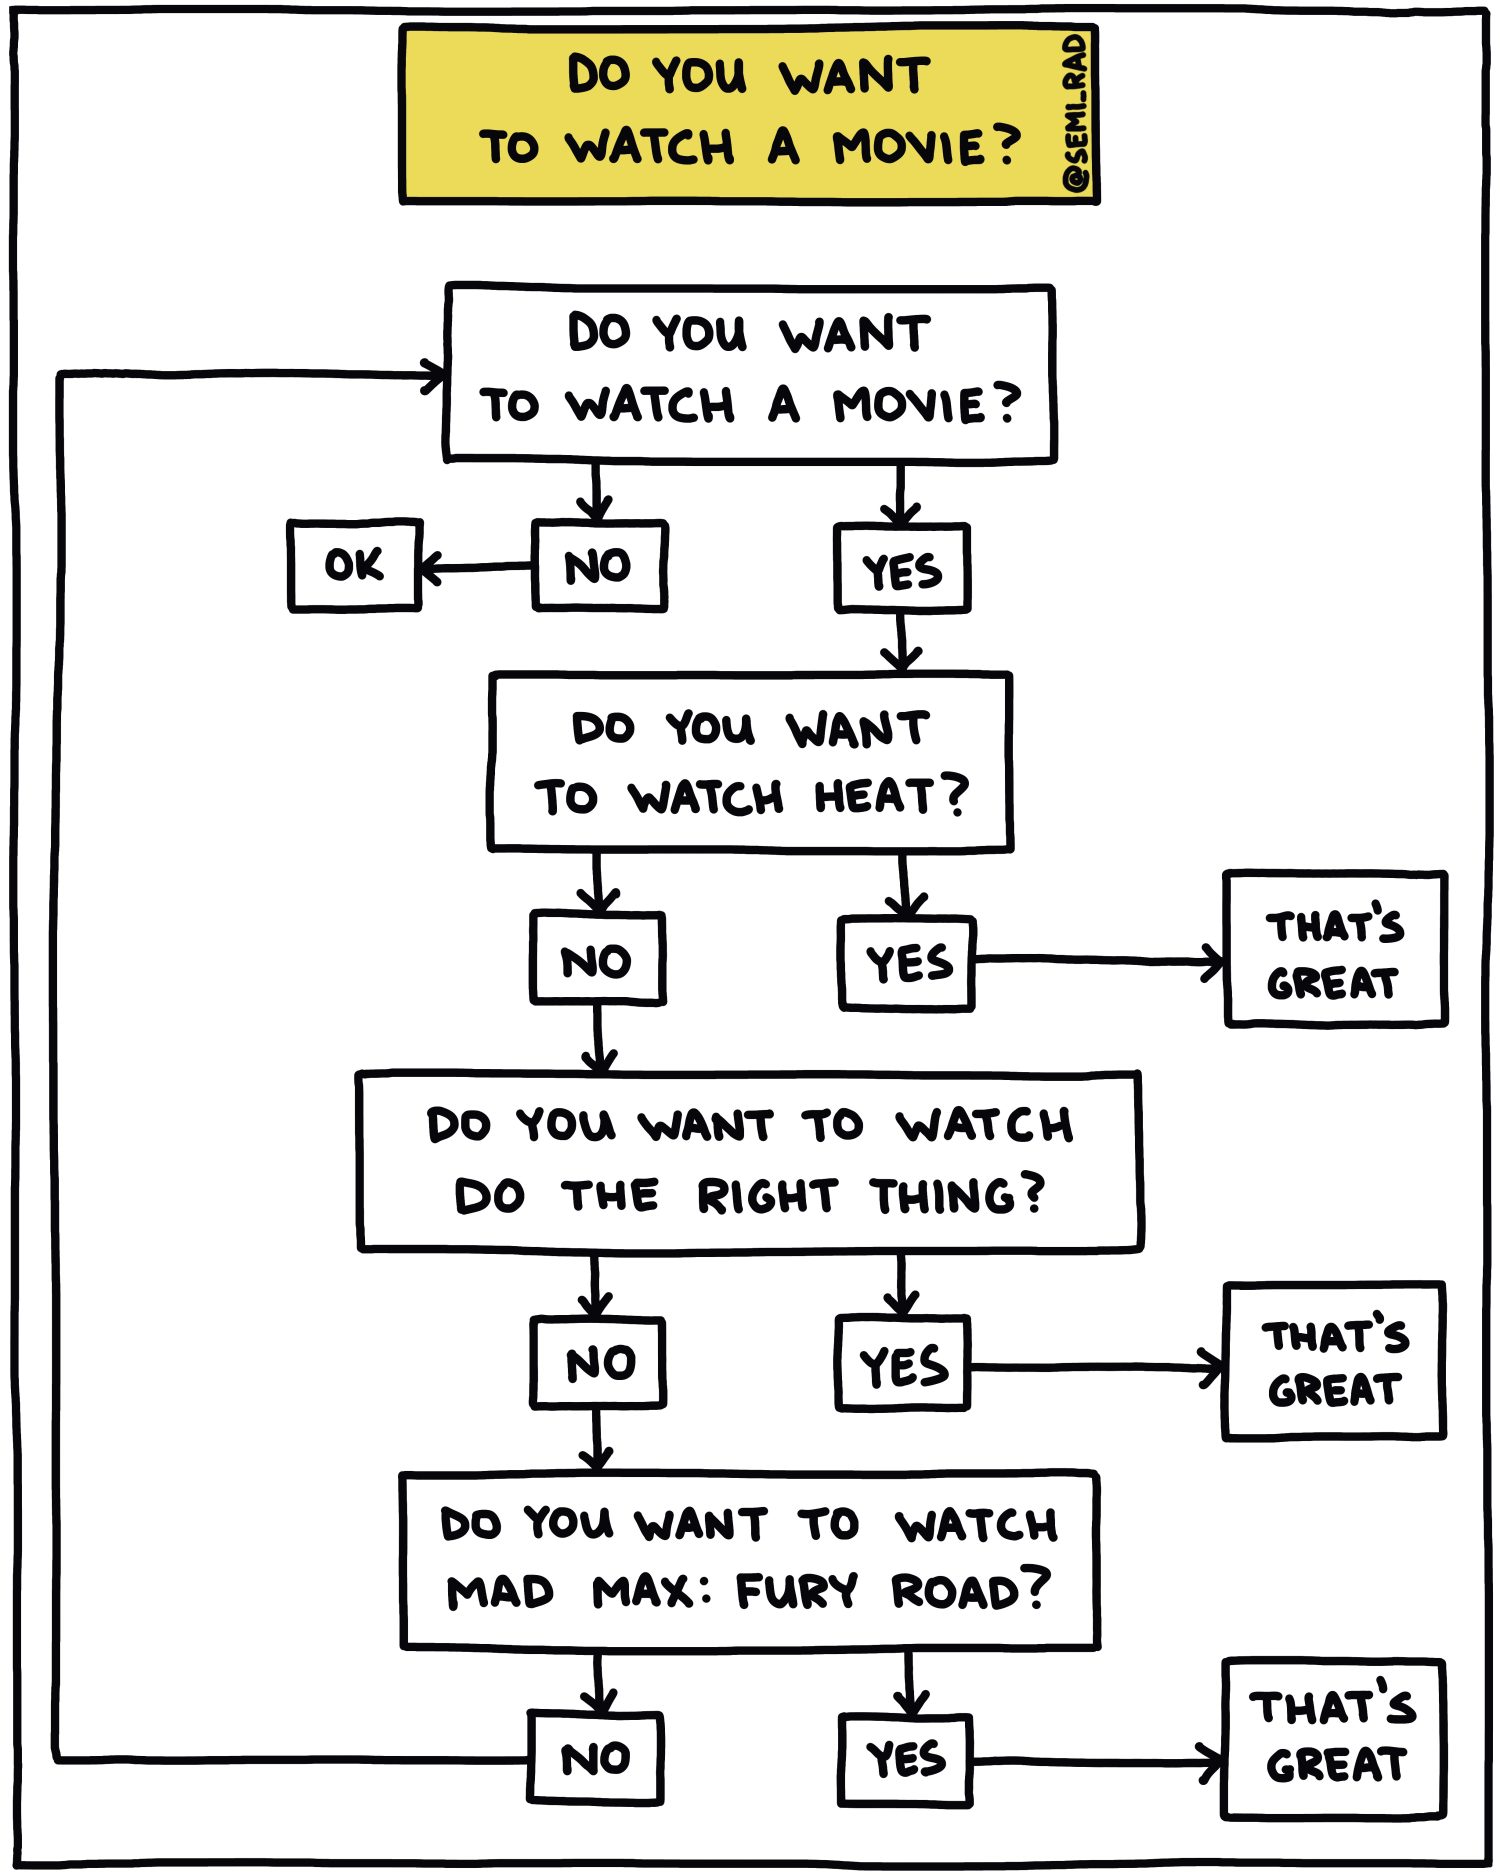 Semi-Rad chart - Do You Want To Watch A Movie